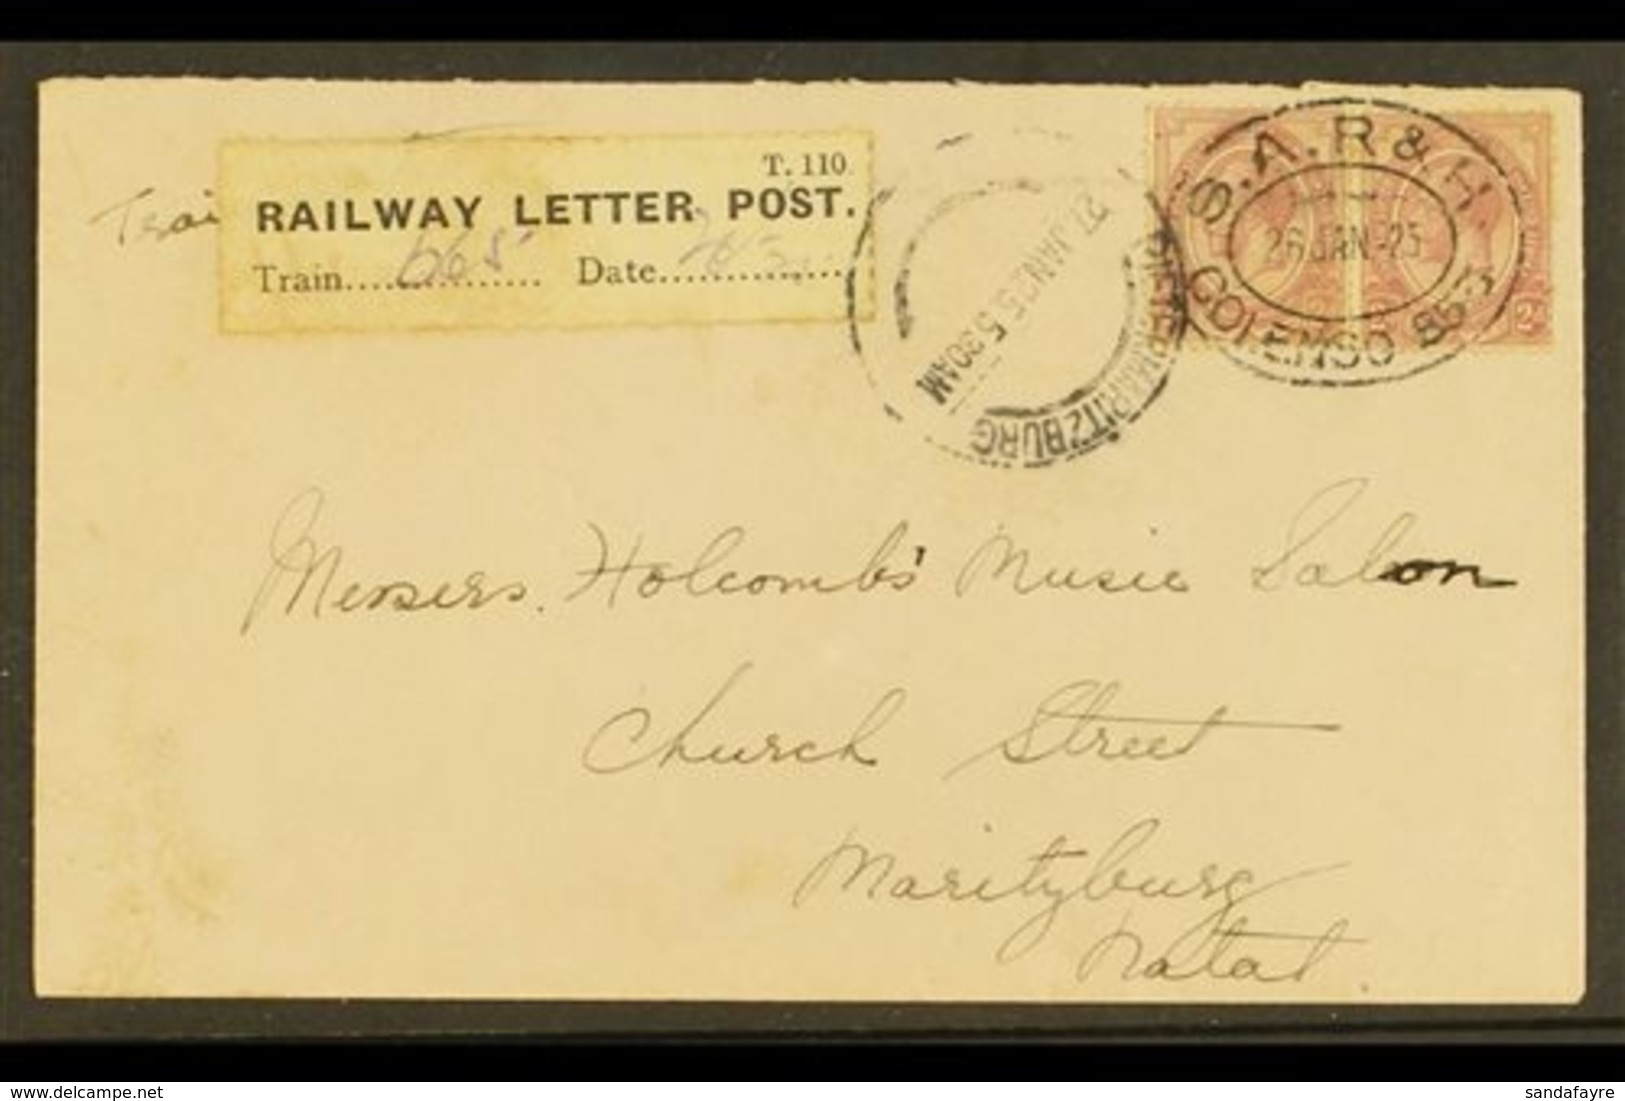 \Y 1925 RAILWAY LETTER POST COVER\Y 2d KGV Pair On Cover, Cancelled With Oval "S.A.R. & H. COLENSO 853" 26.1.25 Postmark - Non Classés